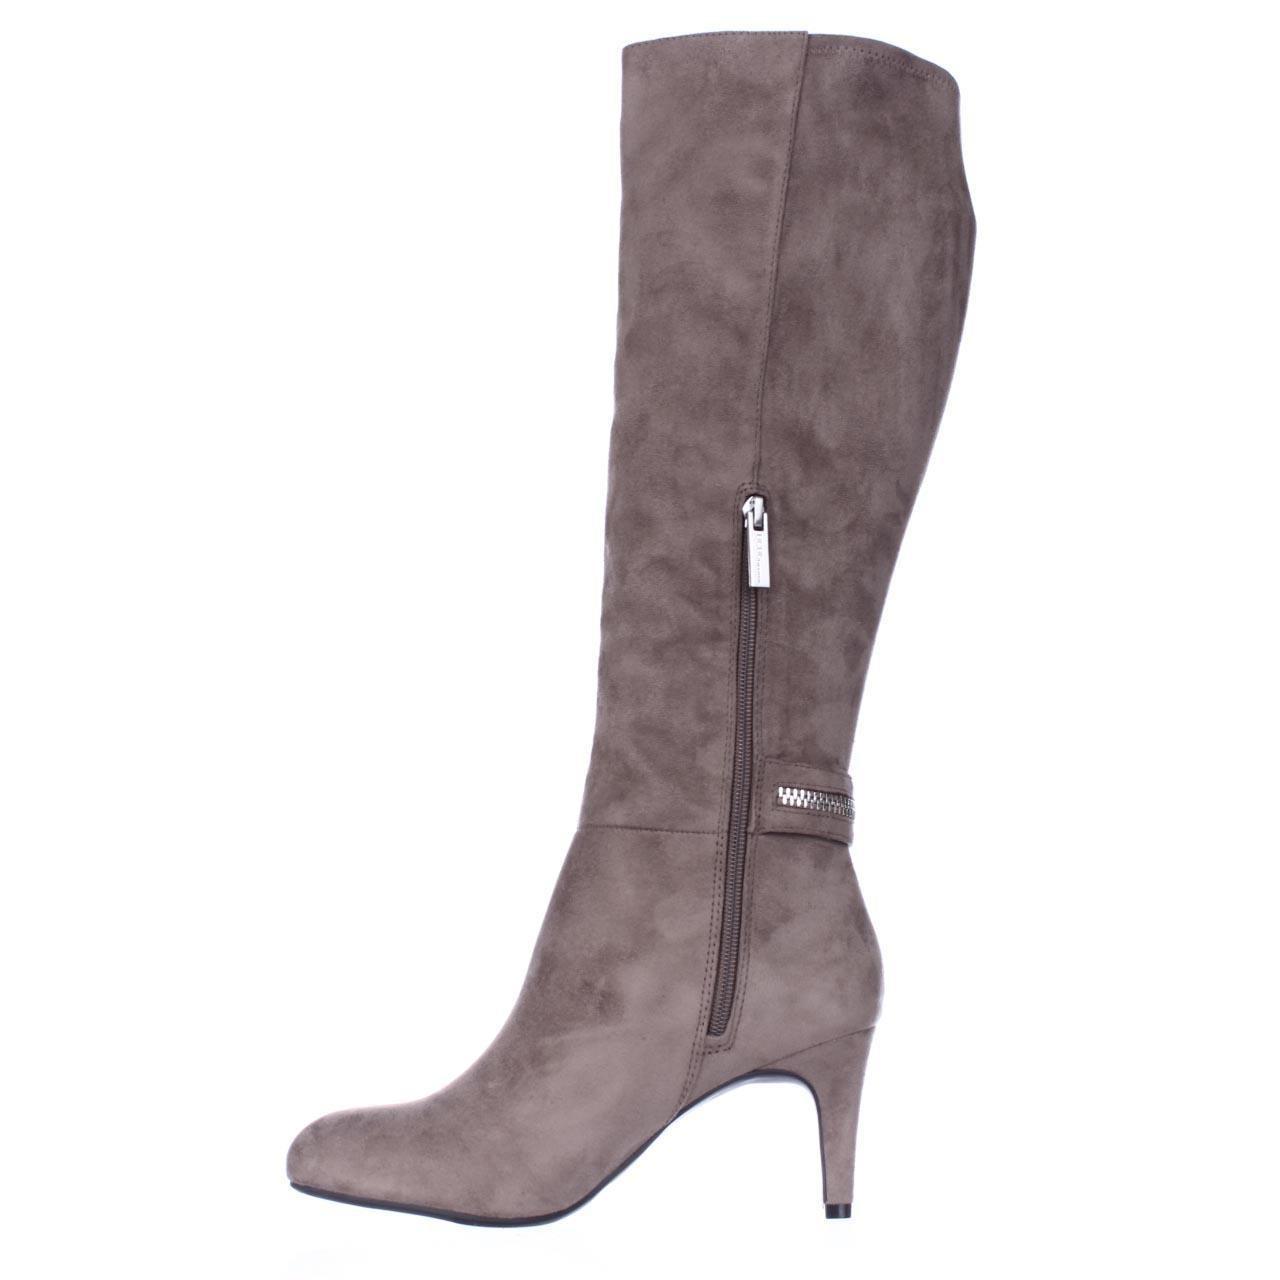 BCBGeneration Rigbie Knee High Dress Boots in Taupe (Brown) - Lyst1280 x 1280